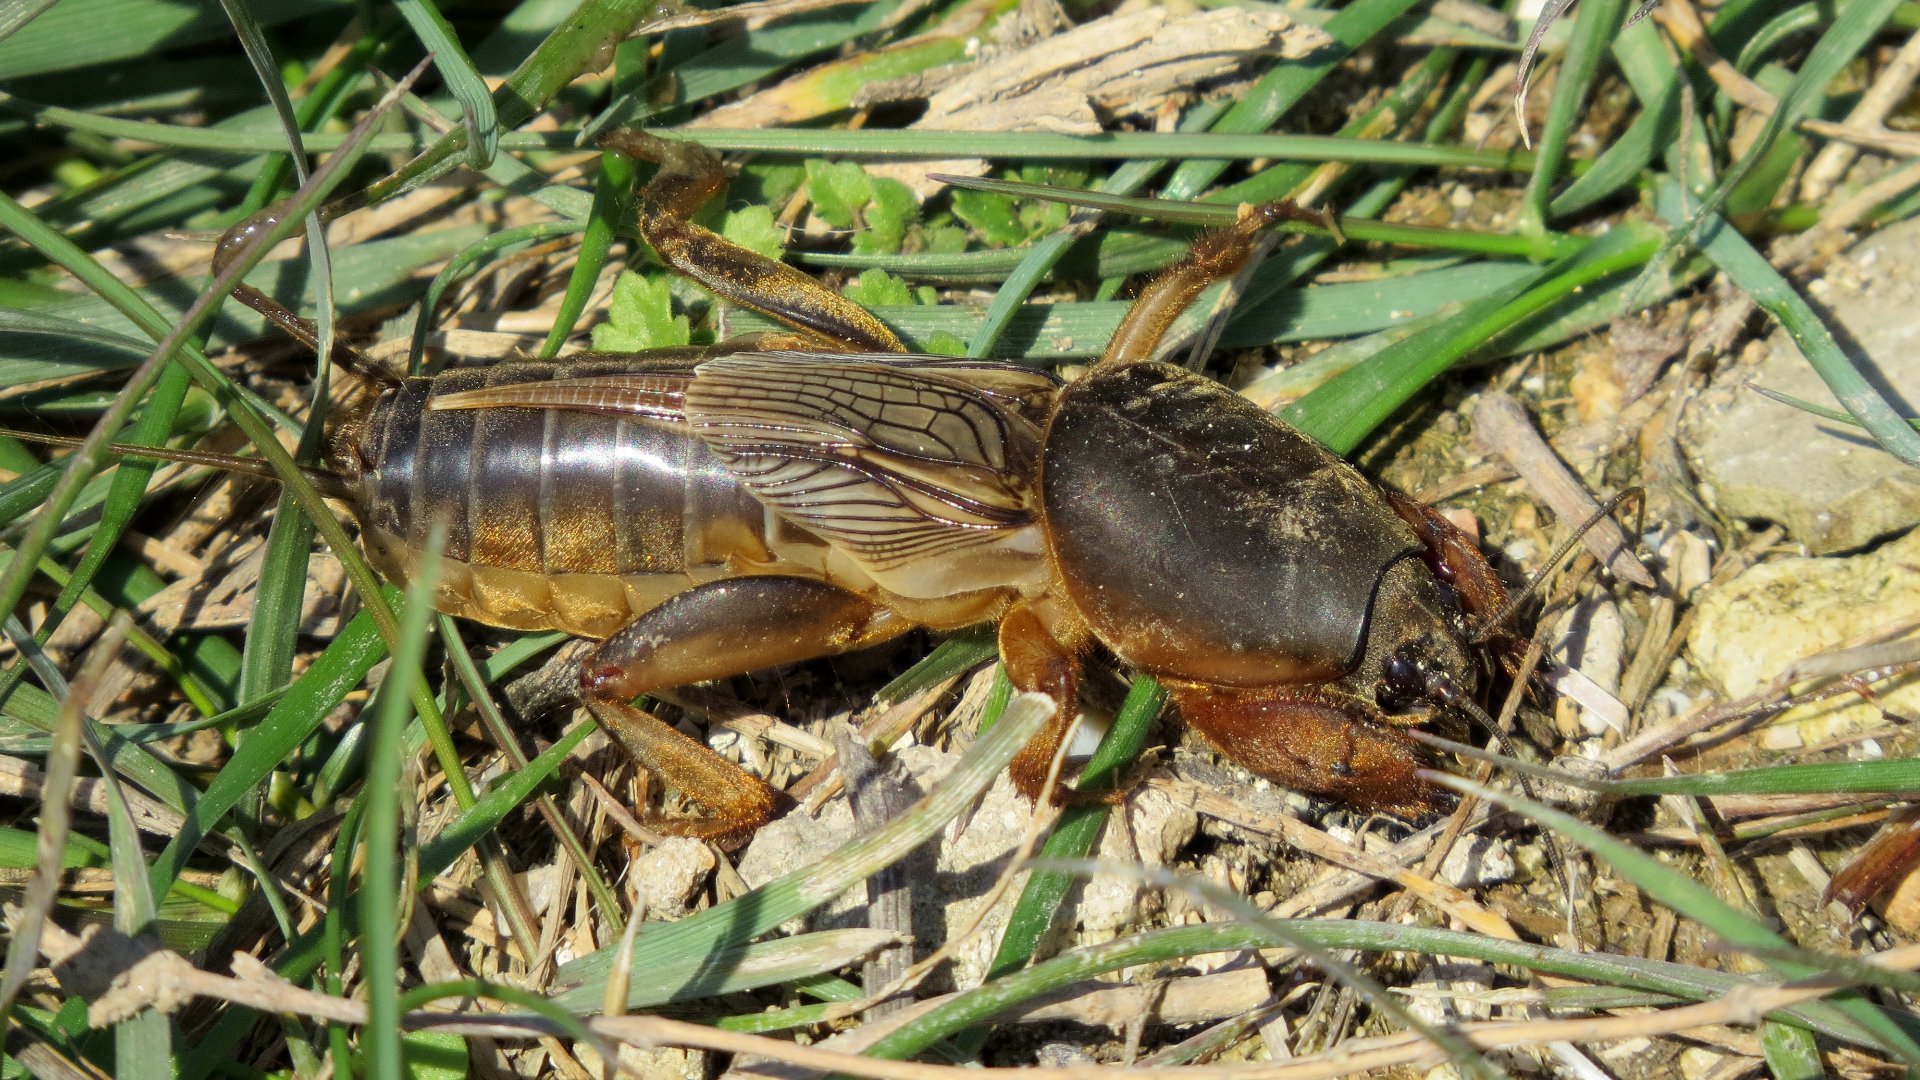 Mole Crickets - Why Are They Such a Big Deal in Florida?